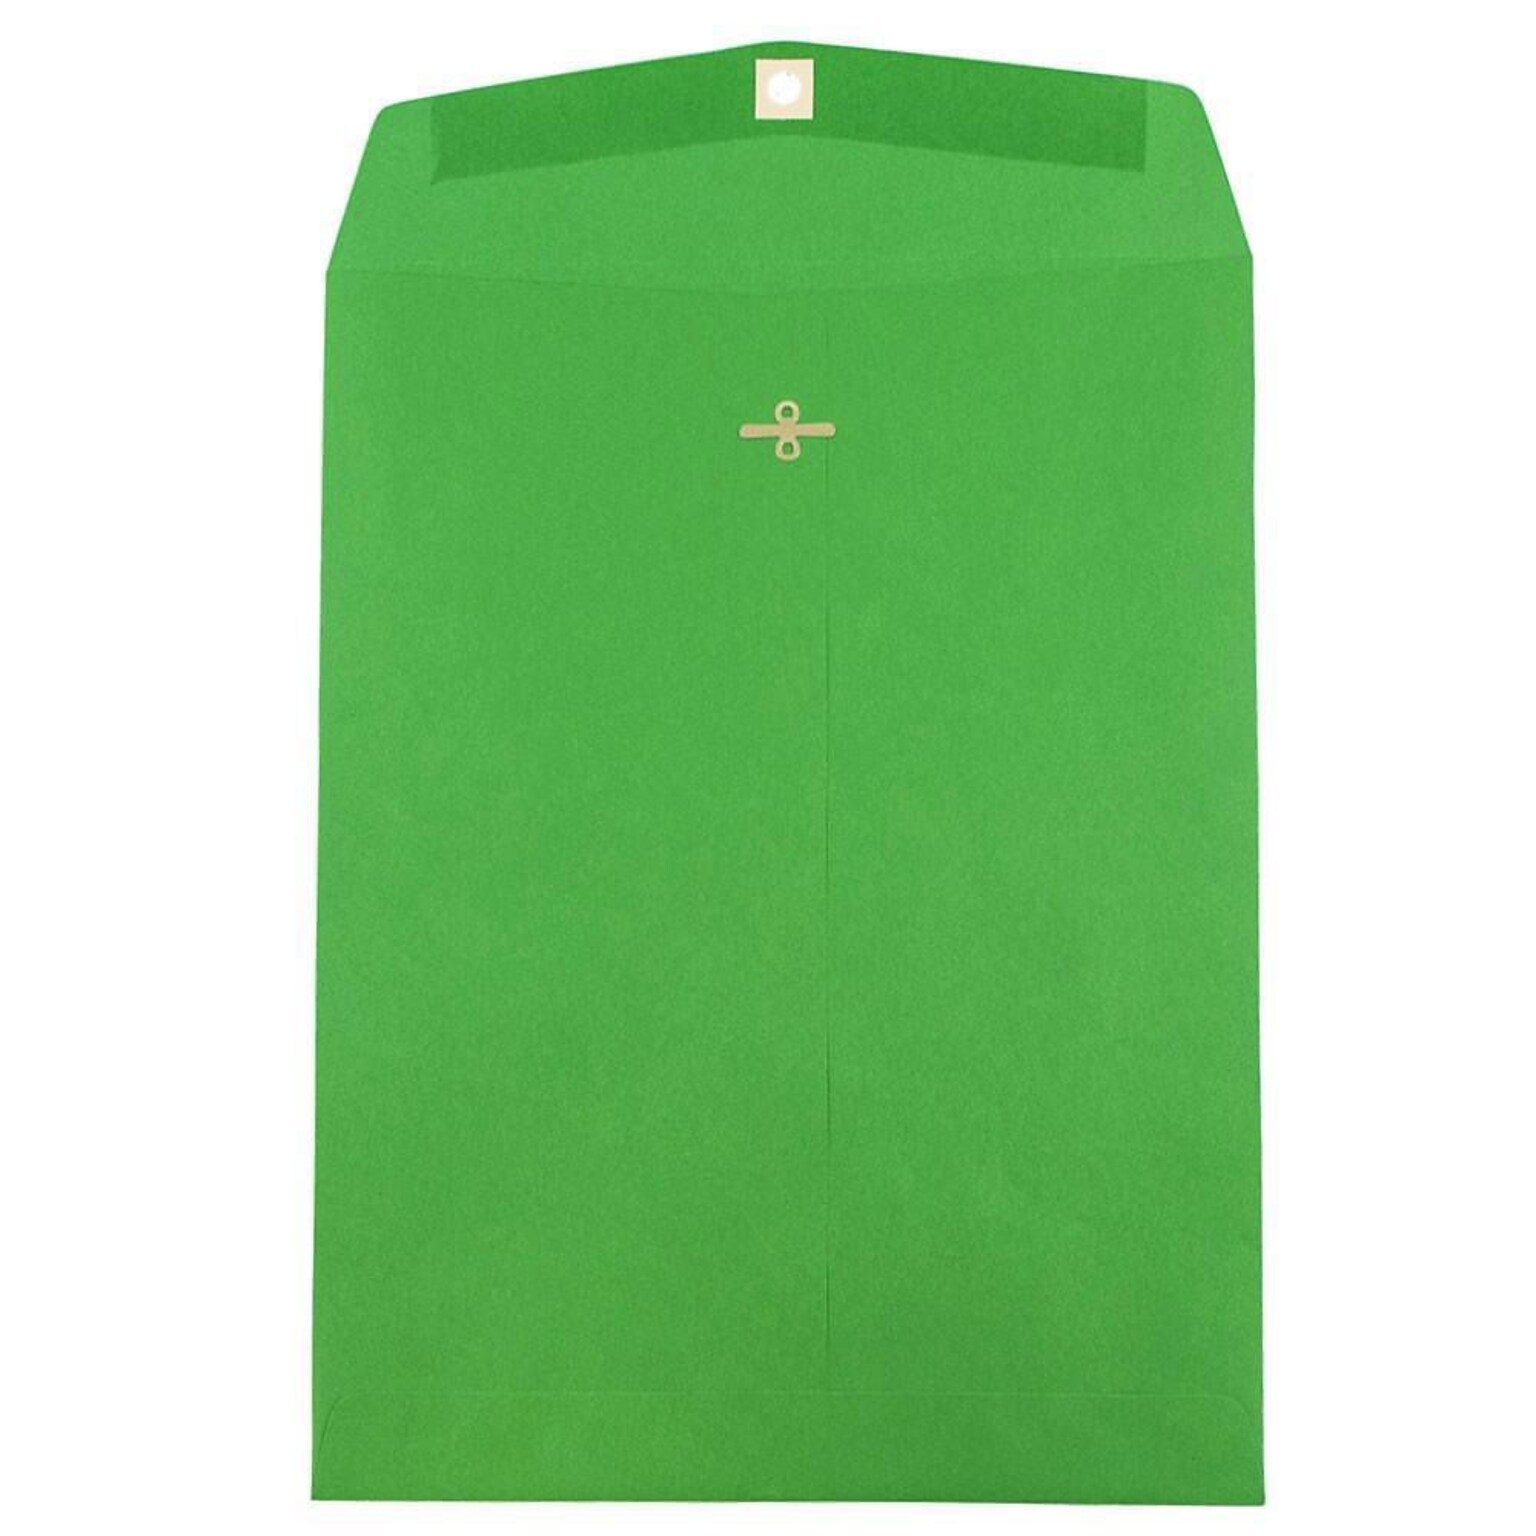 JAM Paper 10 x 13 Open End Catalog Colored Envelopes with Clasp Closure, Green Recycled, 50/Pack (87519i)